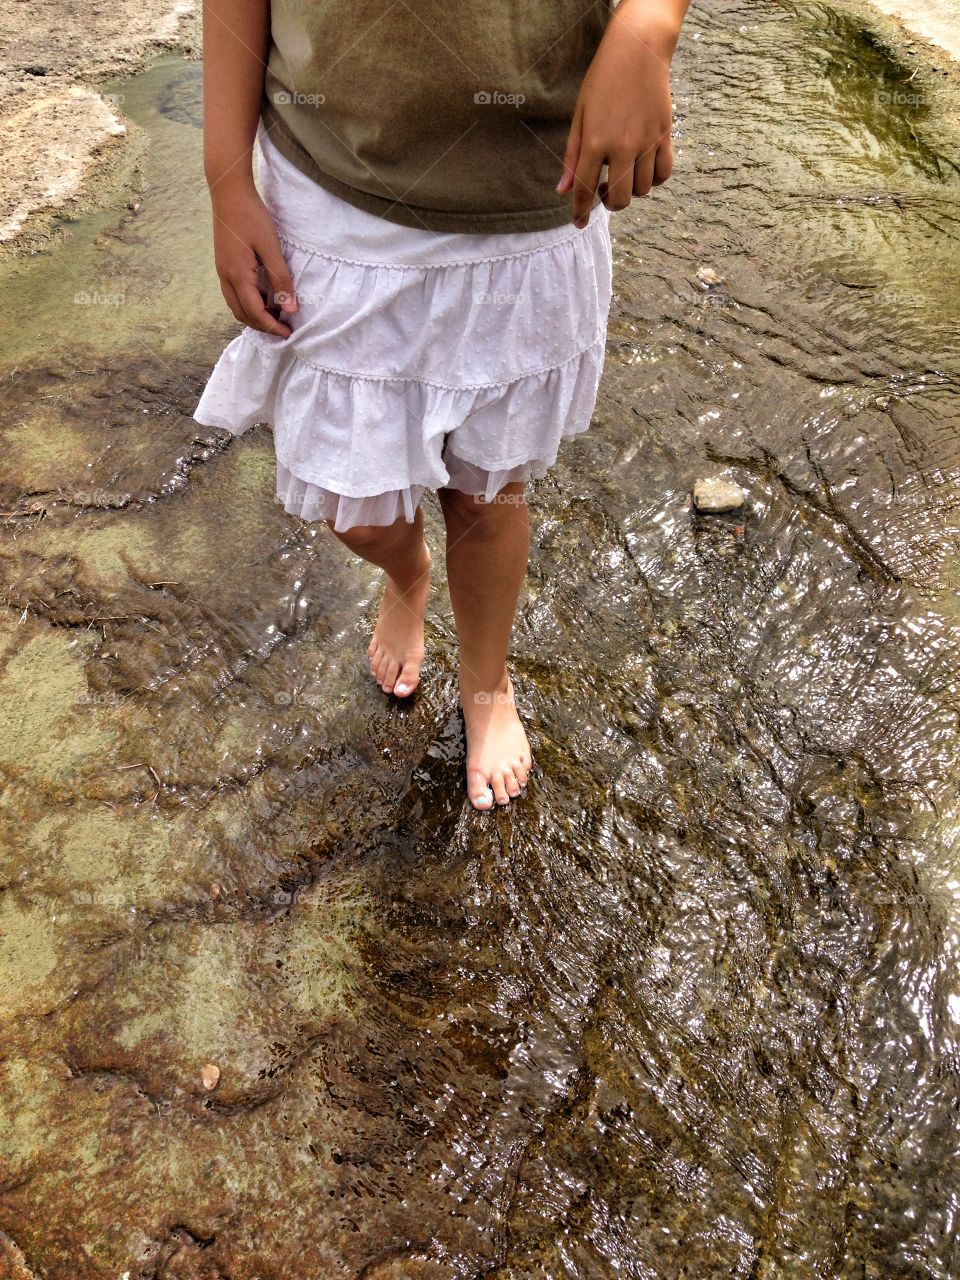 Wade with me, mama. Girl walking in a small stream of water